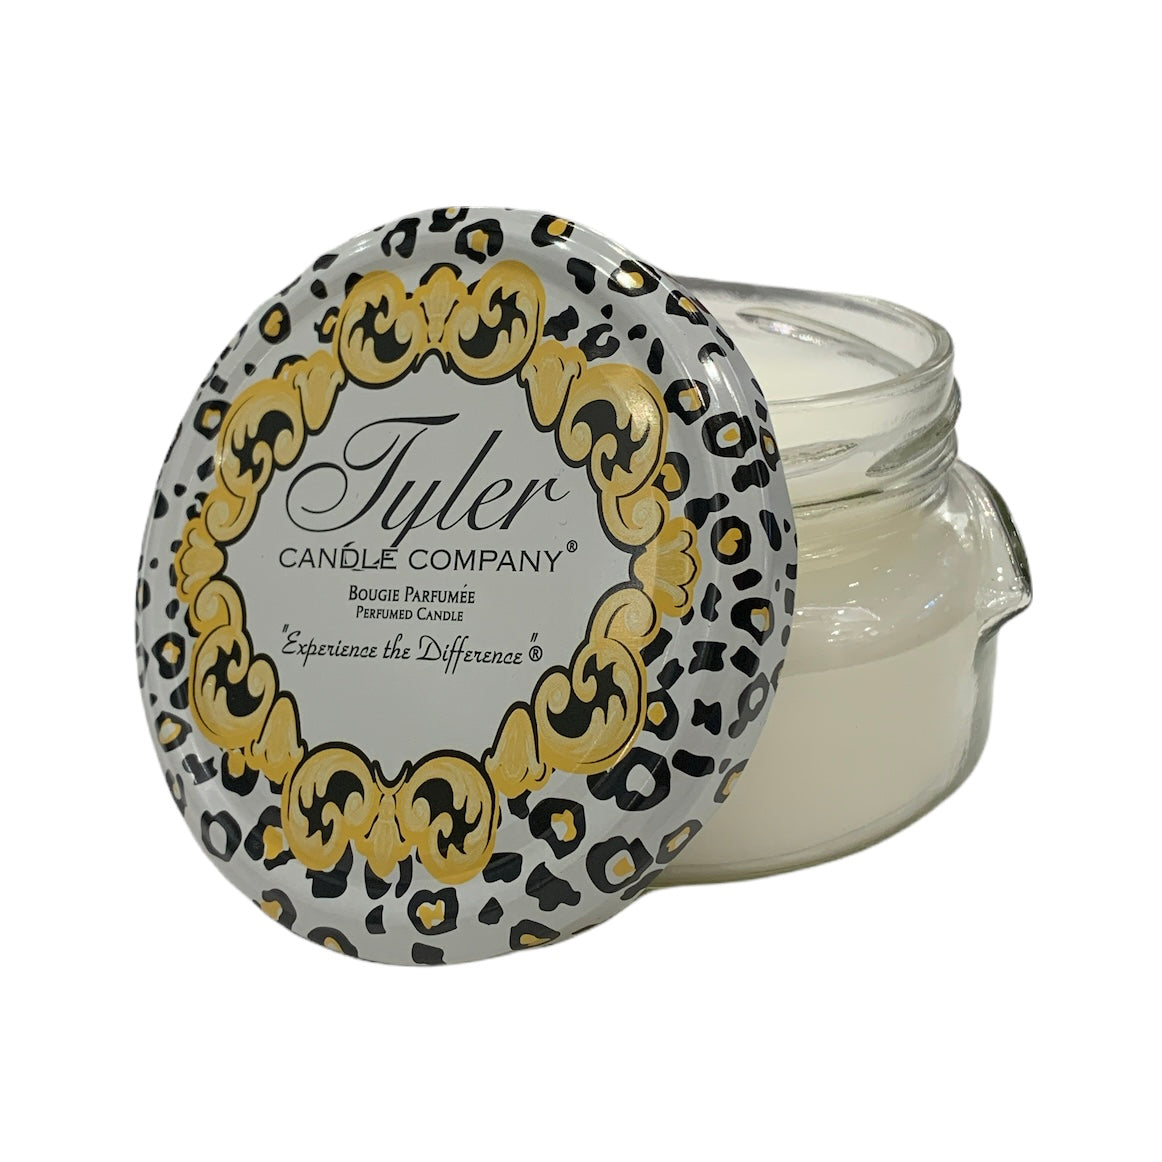 Diva Candle Collection